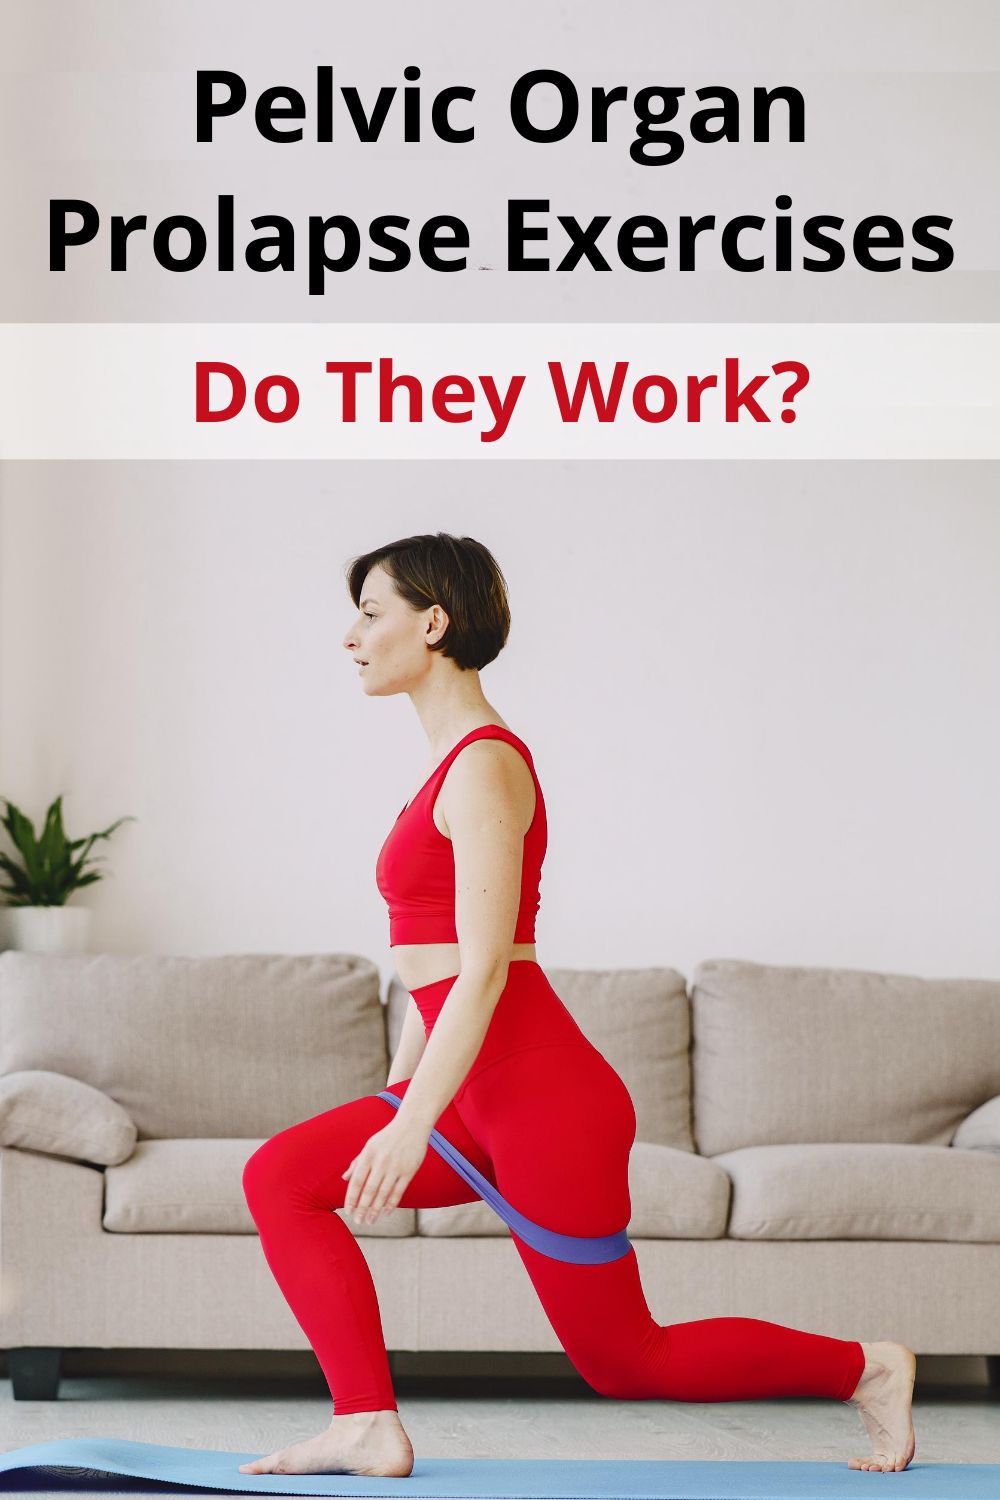 Pelvic Organ Prolapse Exercises: Can They Help? in 2021